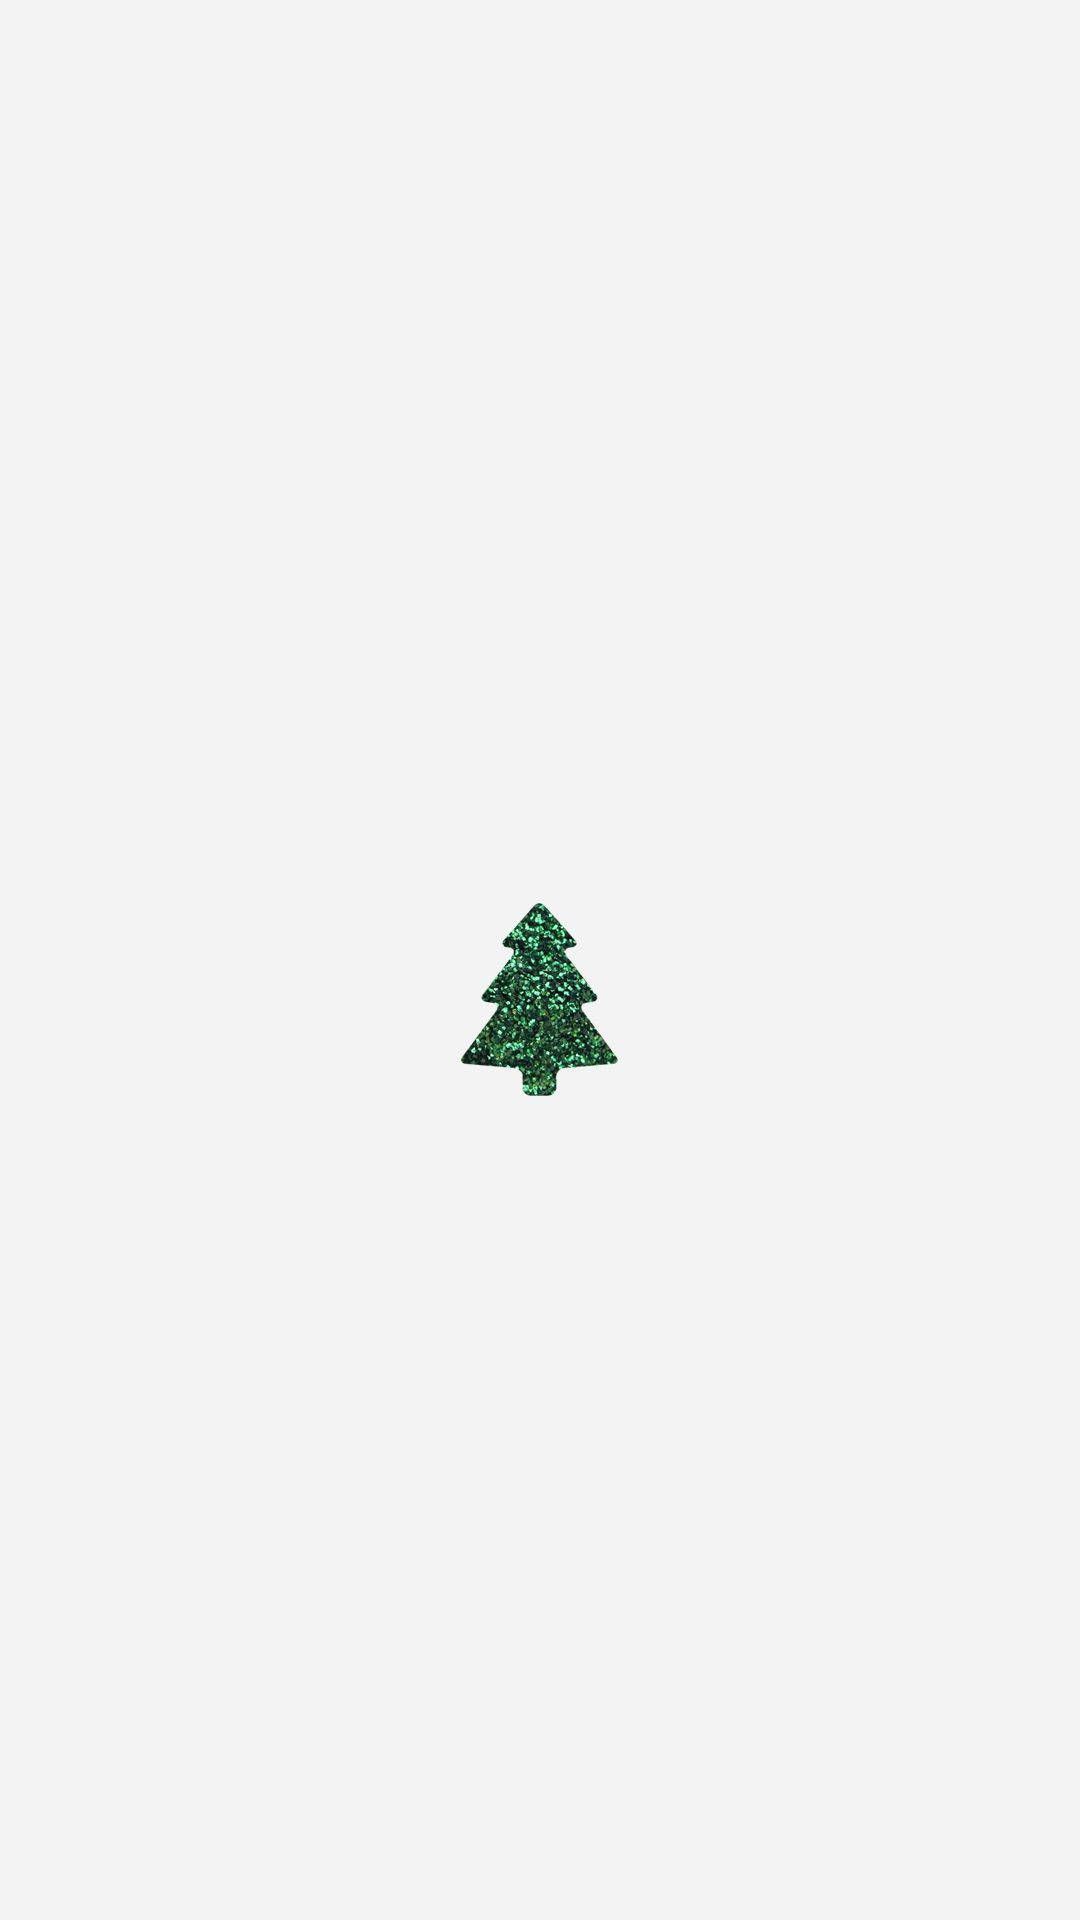 A small green christmas tree on white background - White Christmas